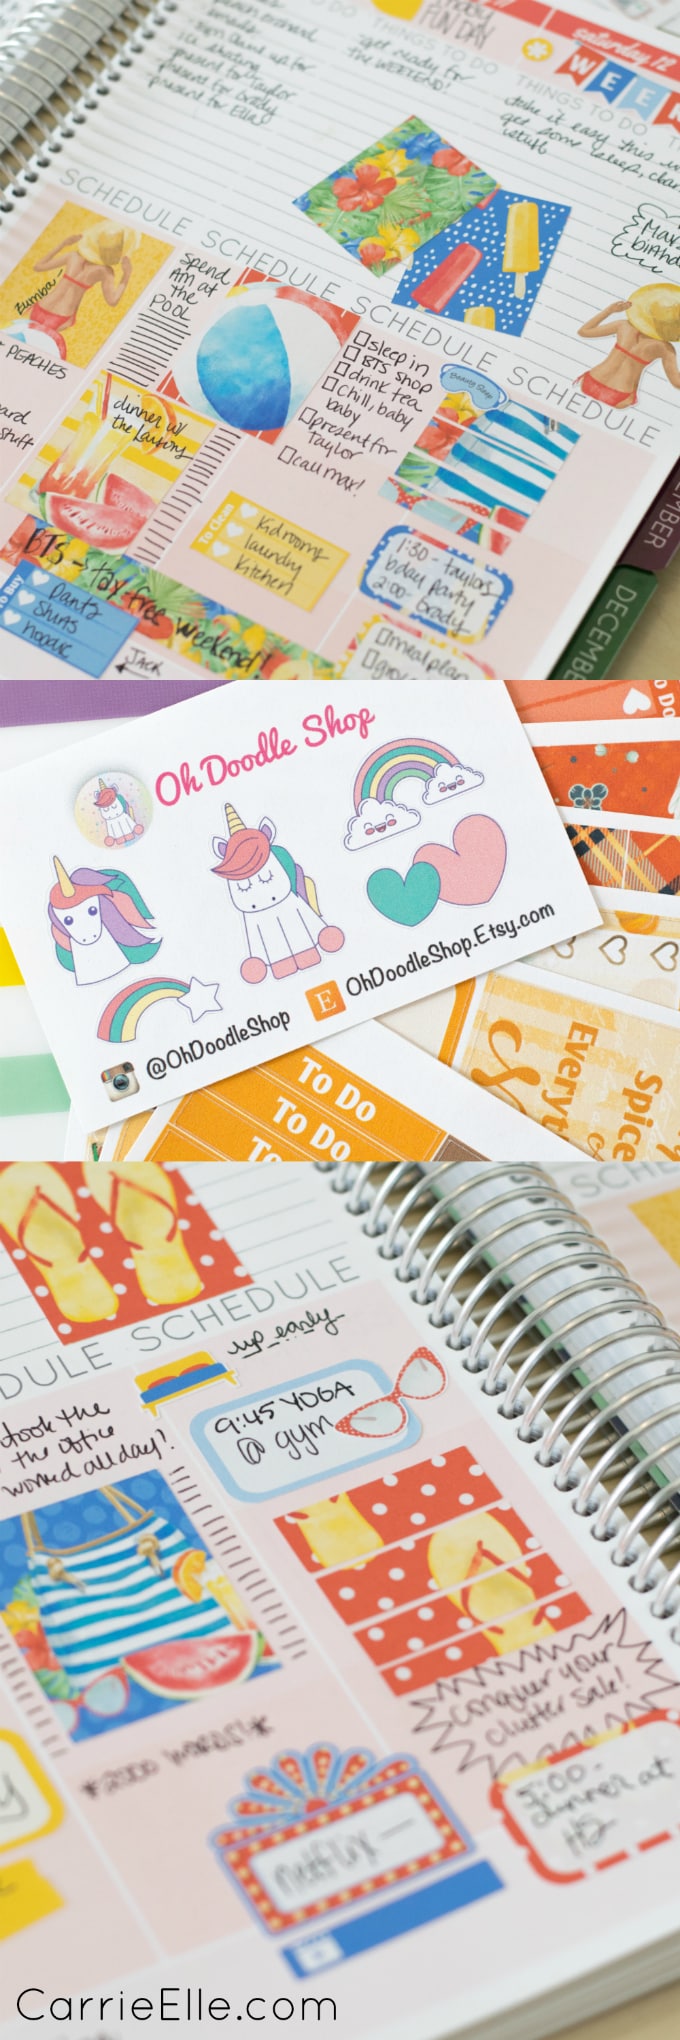 Oh Doodle Shop Planner Stickers